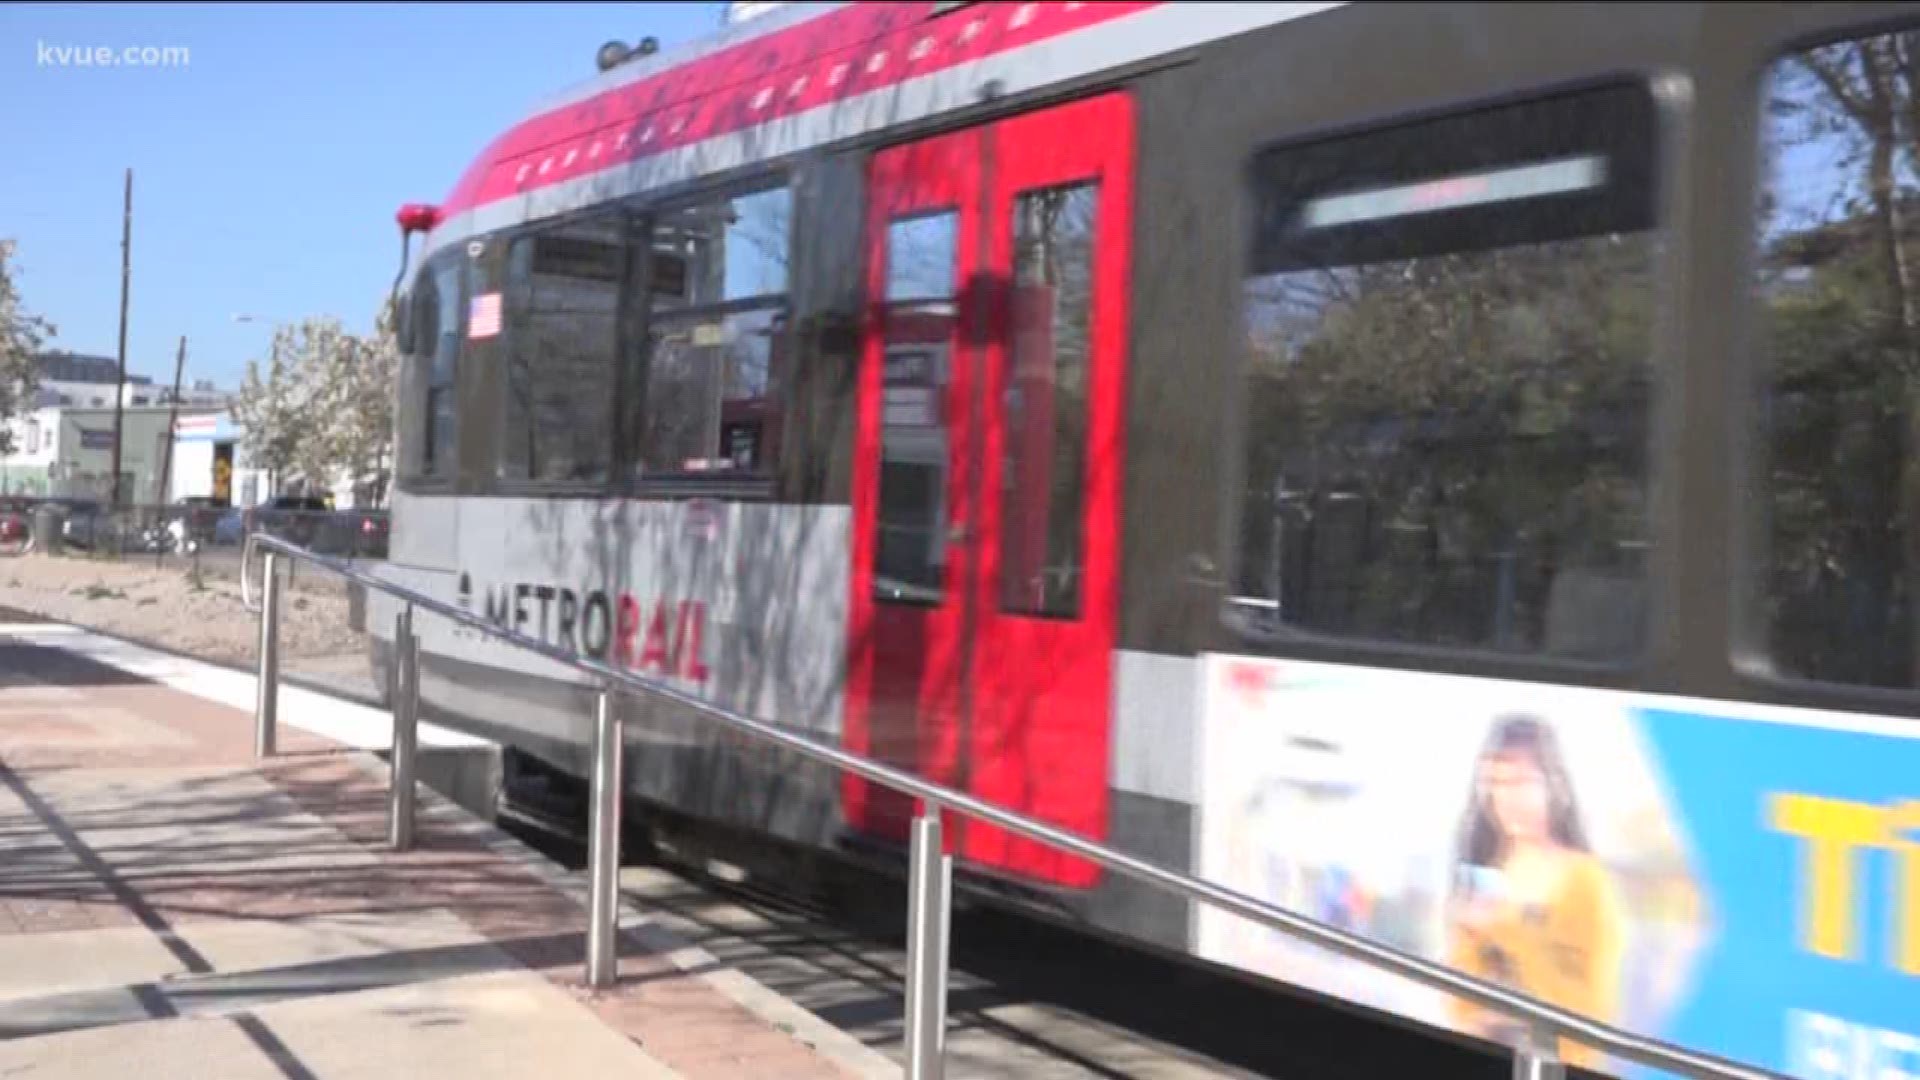 Capital Metro is planning to expand their routes and after receiving feedback from the community, they are ready to vote on their new project.